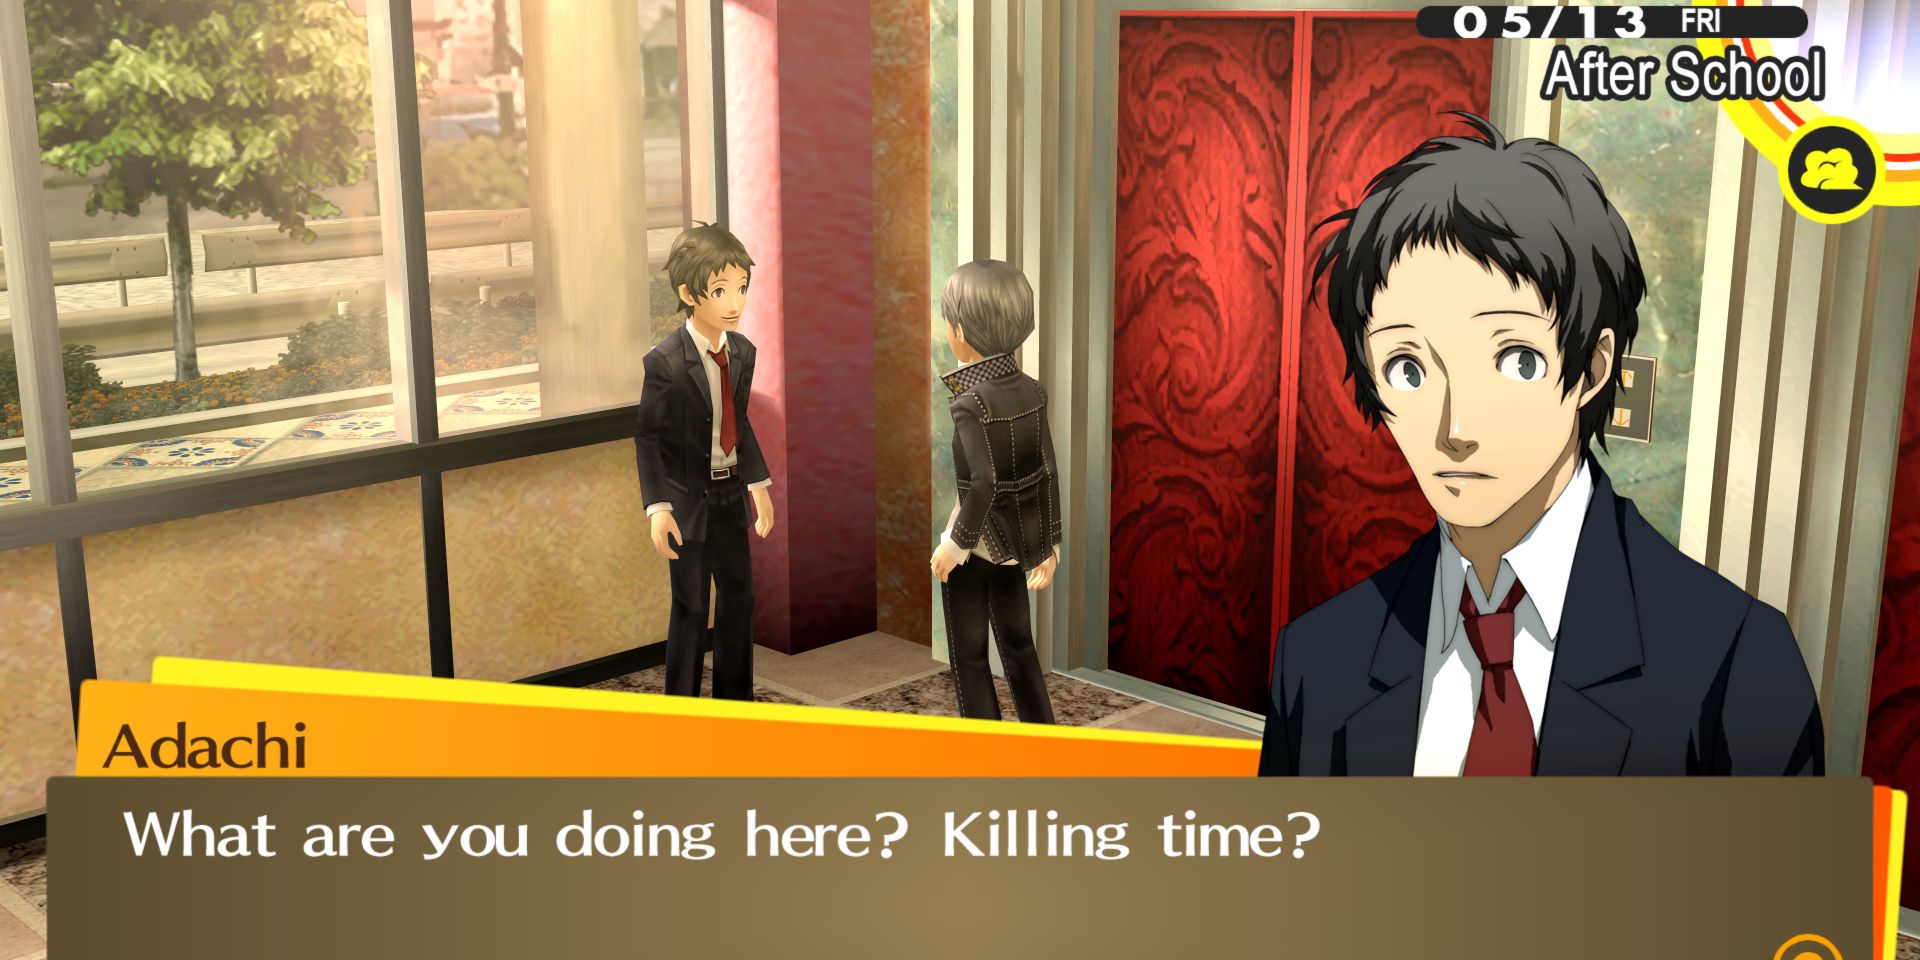 The protagonist (Yu) meets up with Tohru Adachi at Junes in Persona 4 Golden